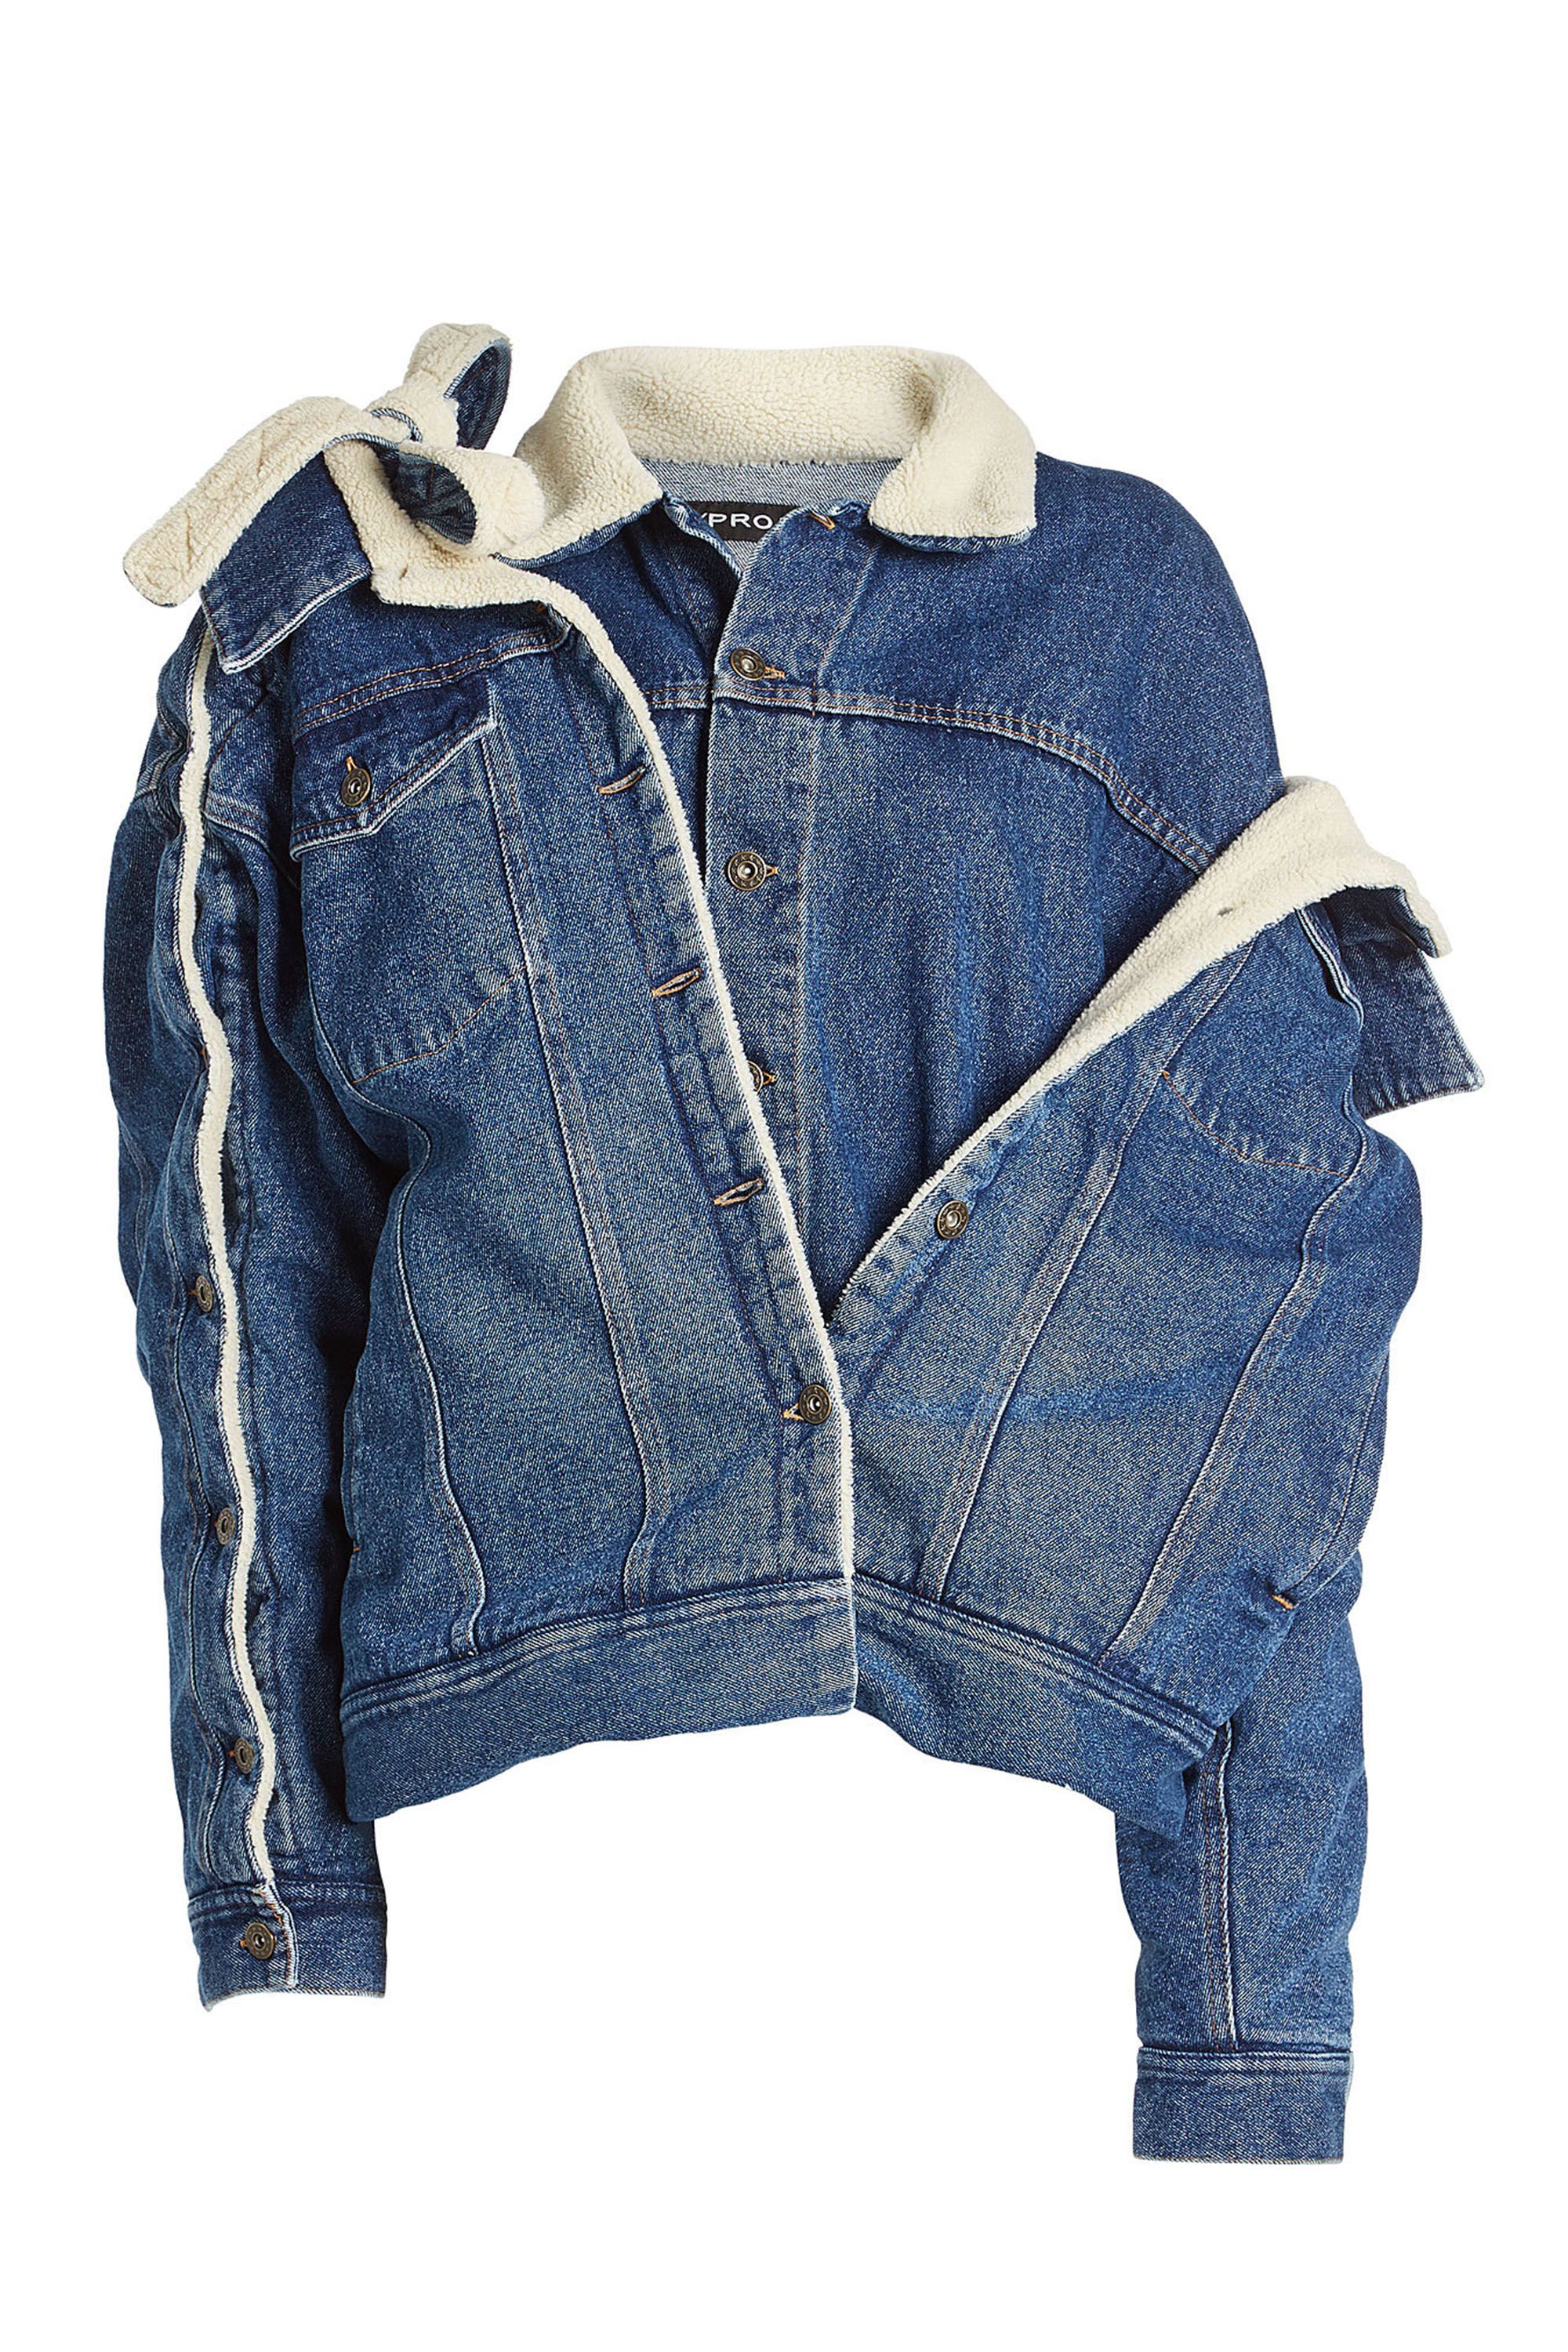 15 Denim Jackets for Women - Classic Jean Jacket Options for